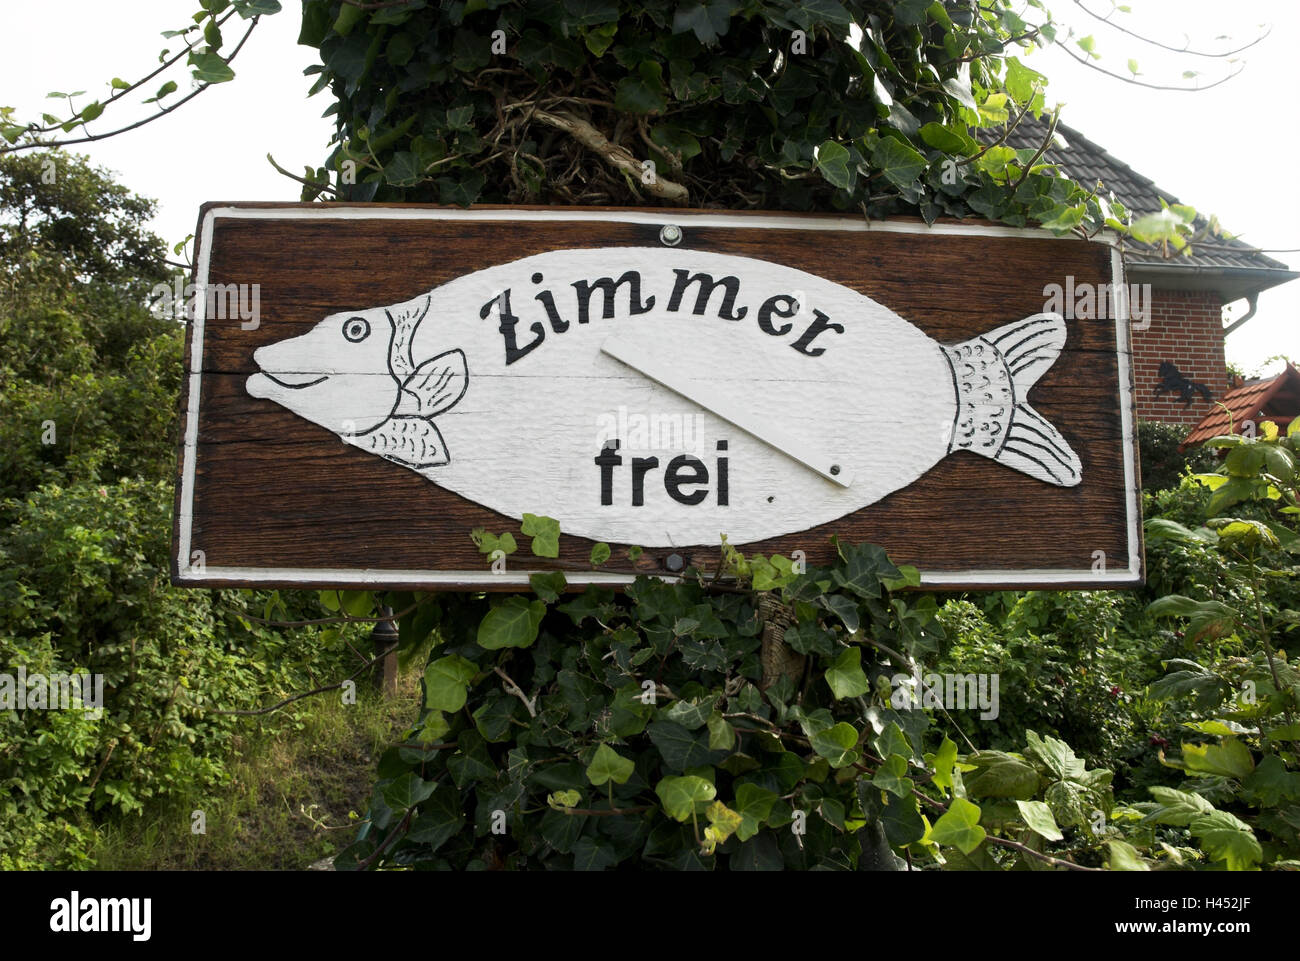 Sign, 'Zimmer frei', Stock Photo